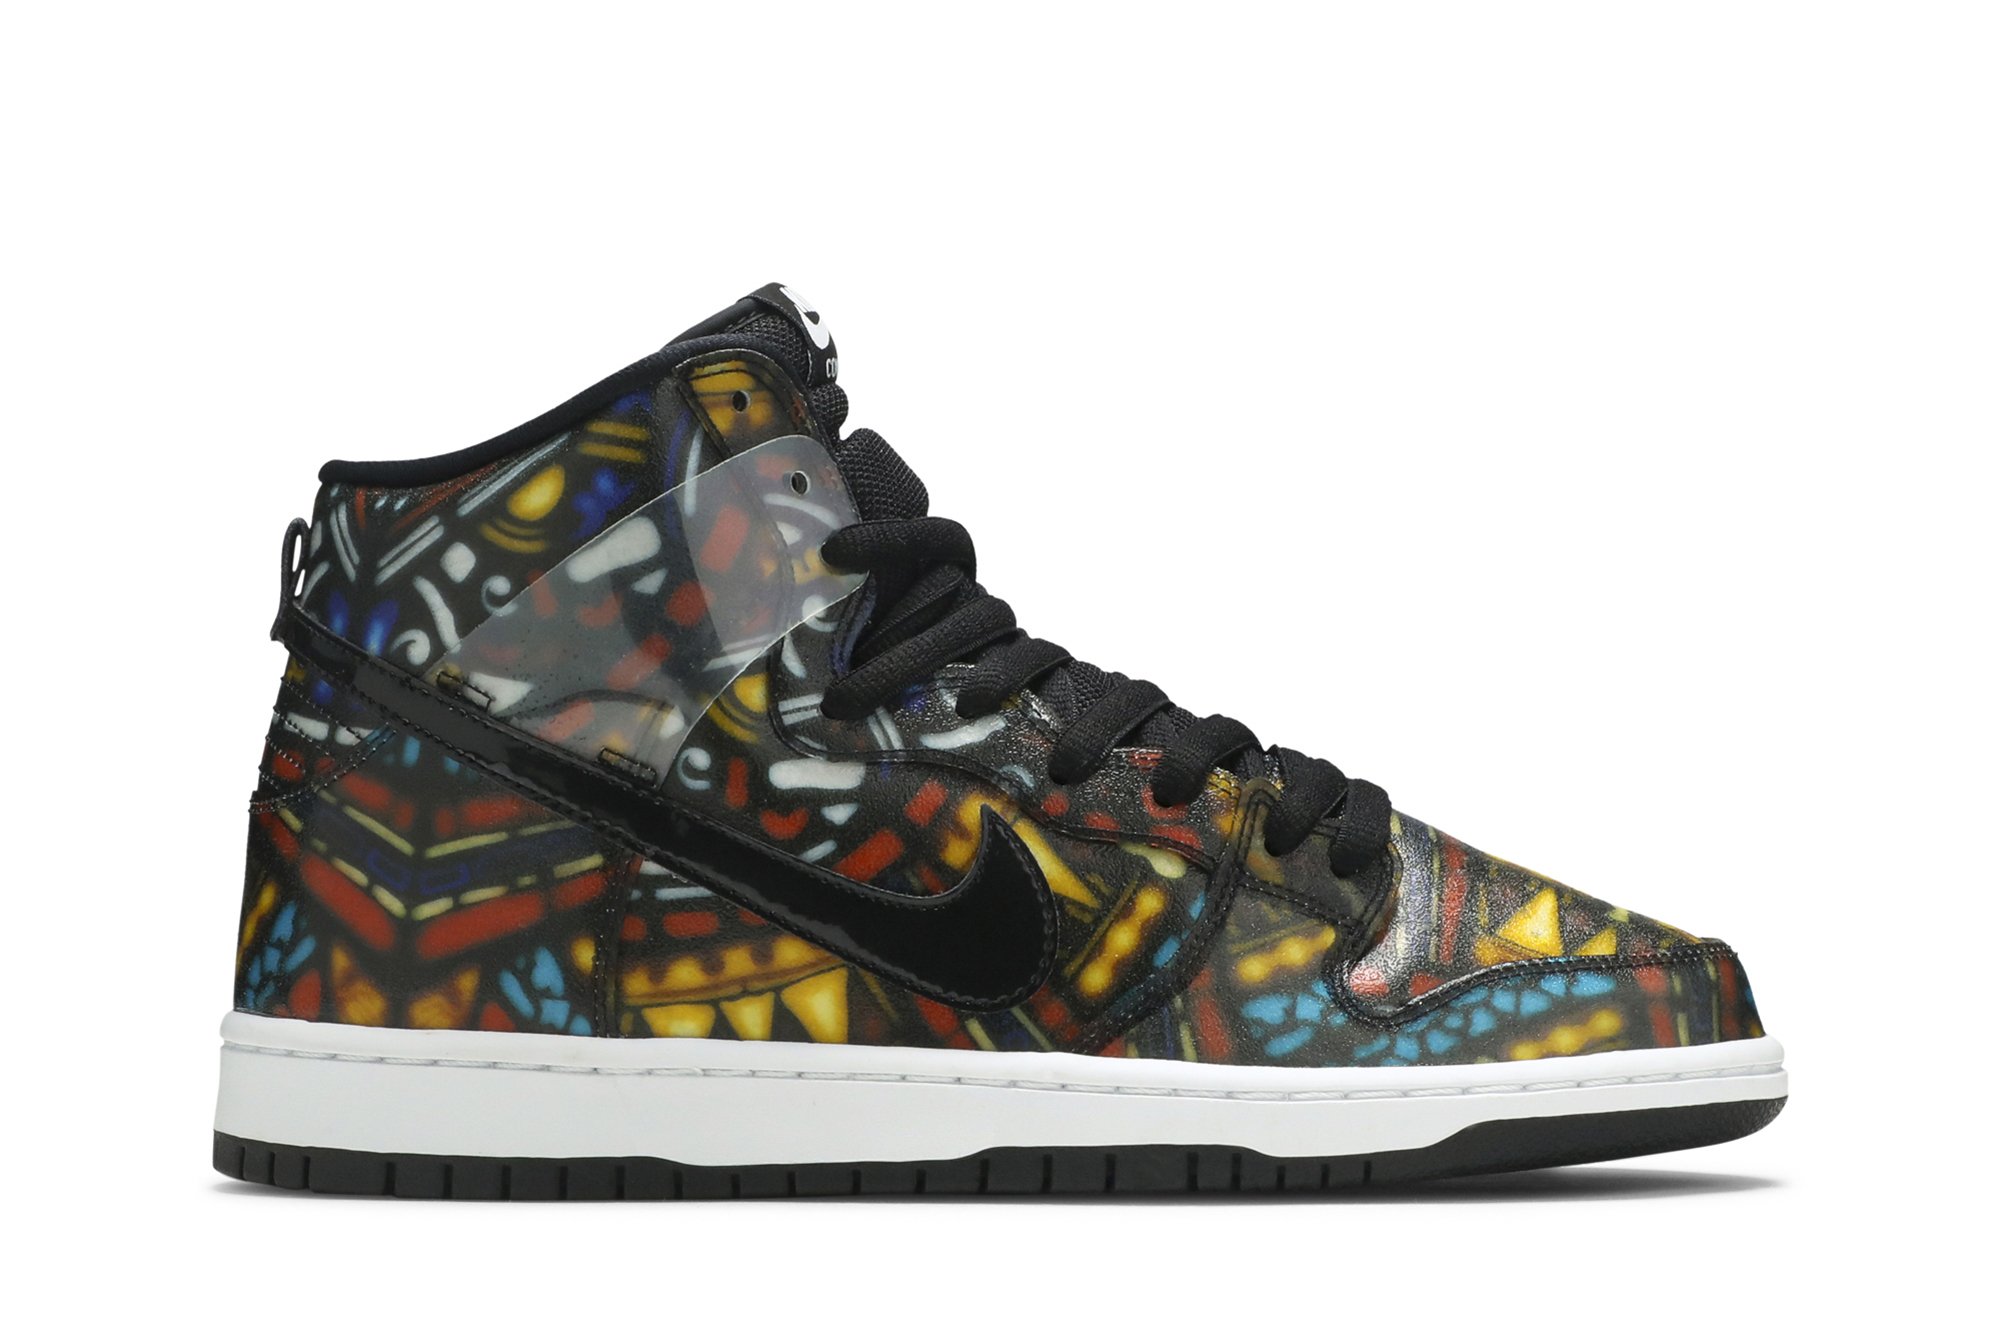 Buy Concepts x SB Dunk High 'Stained Glass' Special Box - 313171 606 S |  GOAT